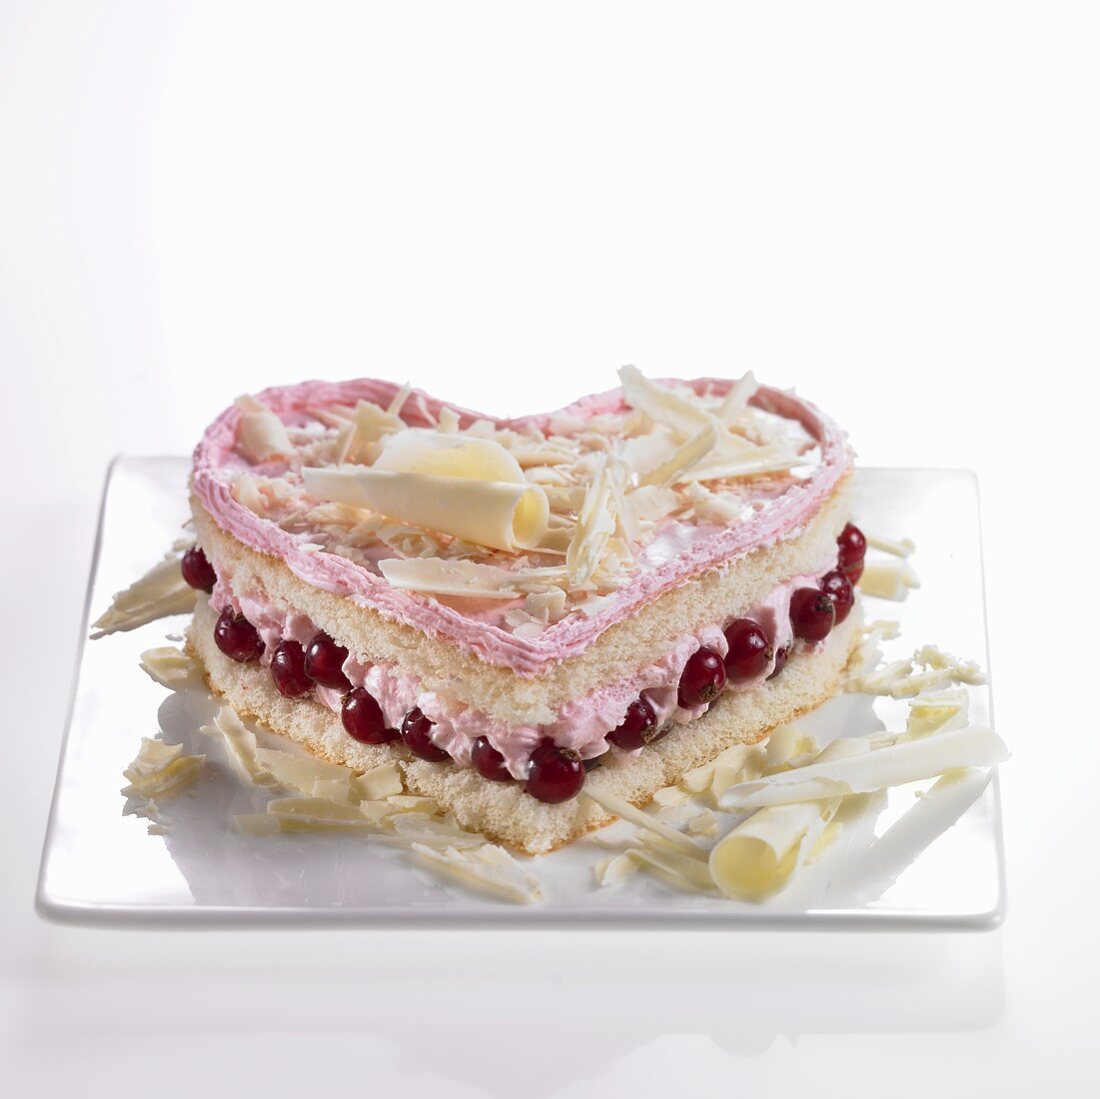 Heart-shaped sponge cake with redcurrants, cream and white chocolate